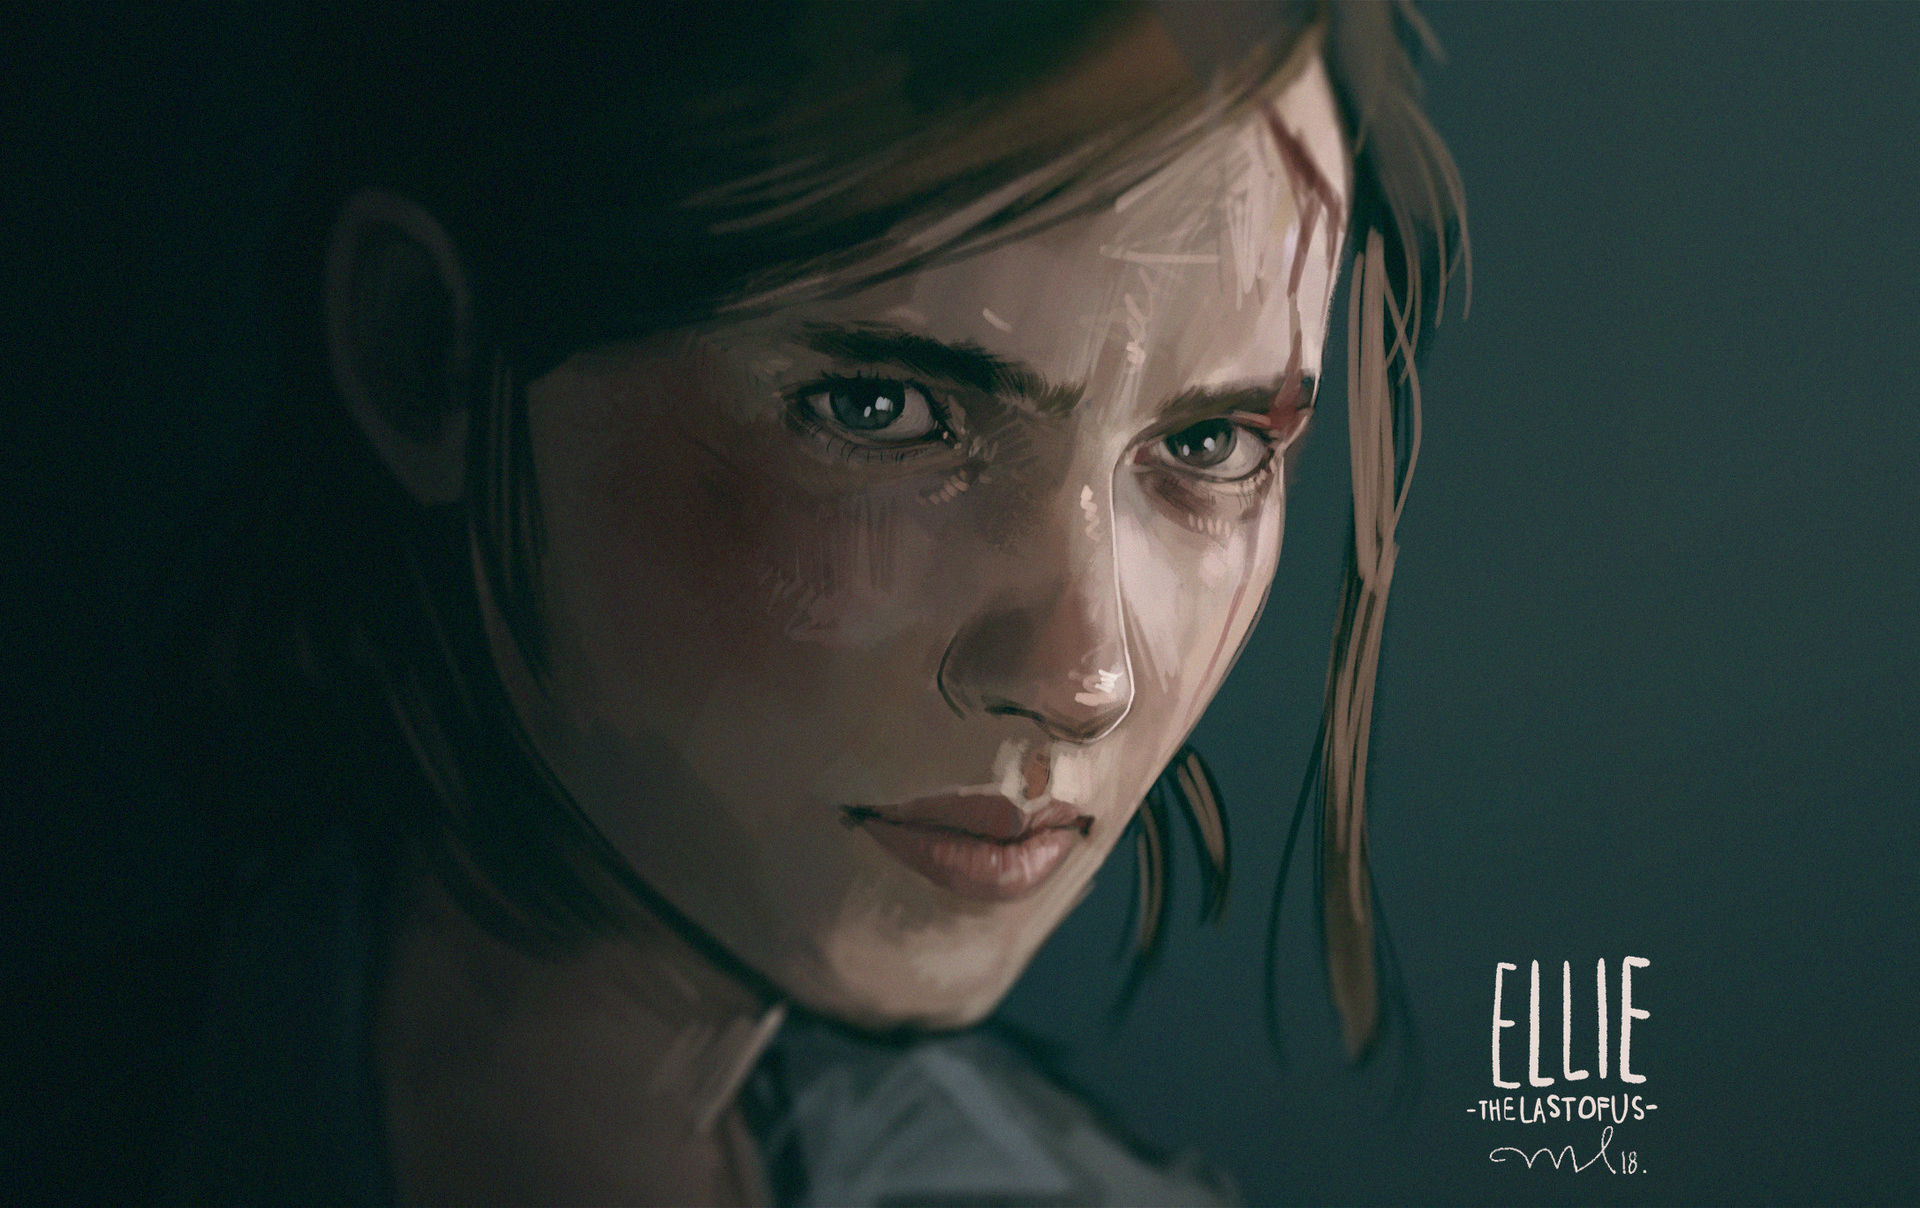 Wallpaper of Ellie The Last of Us Part II Video Game background